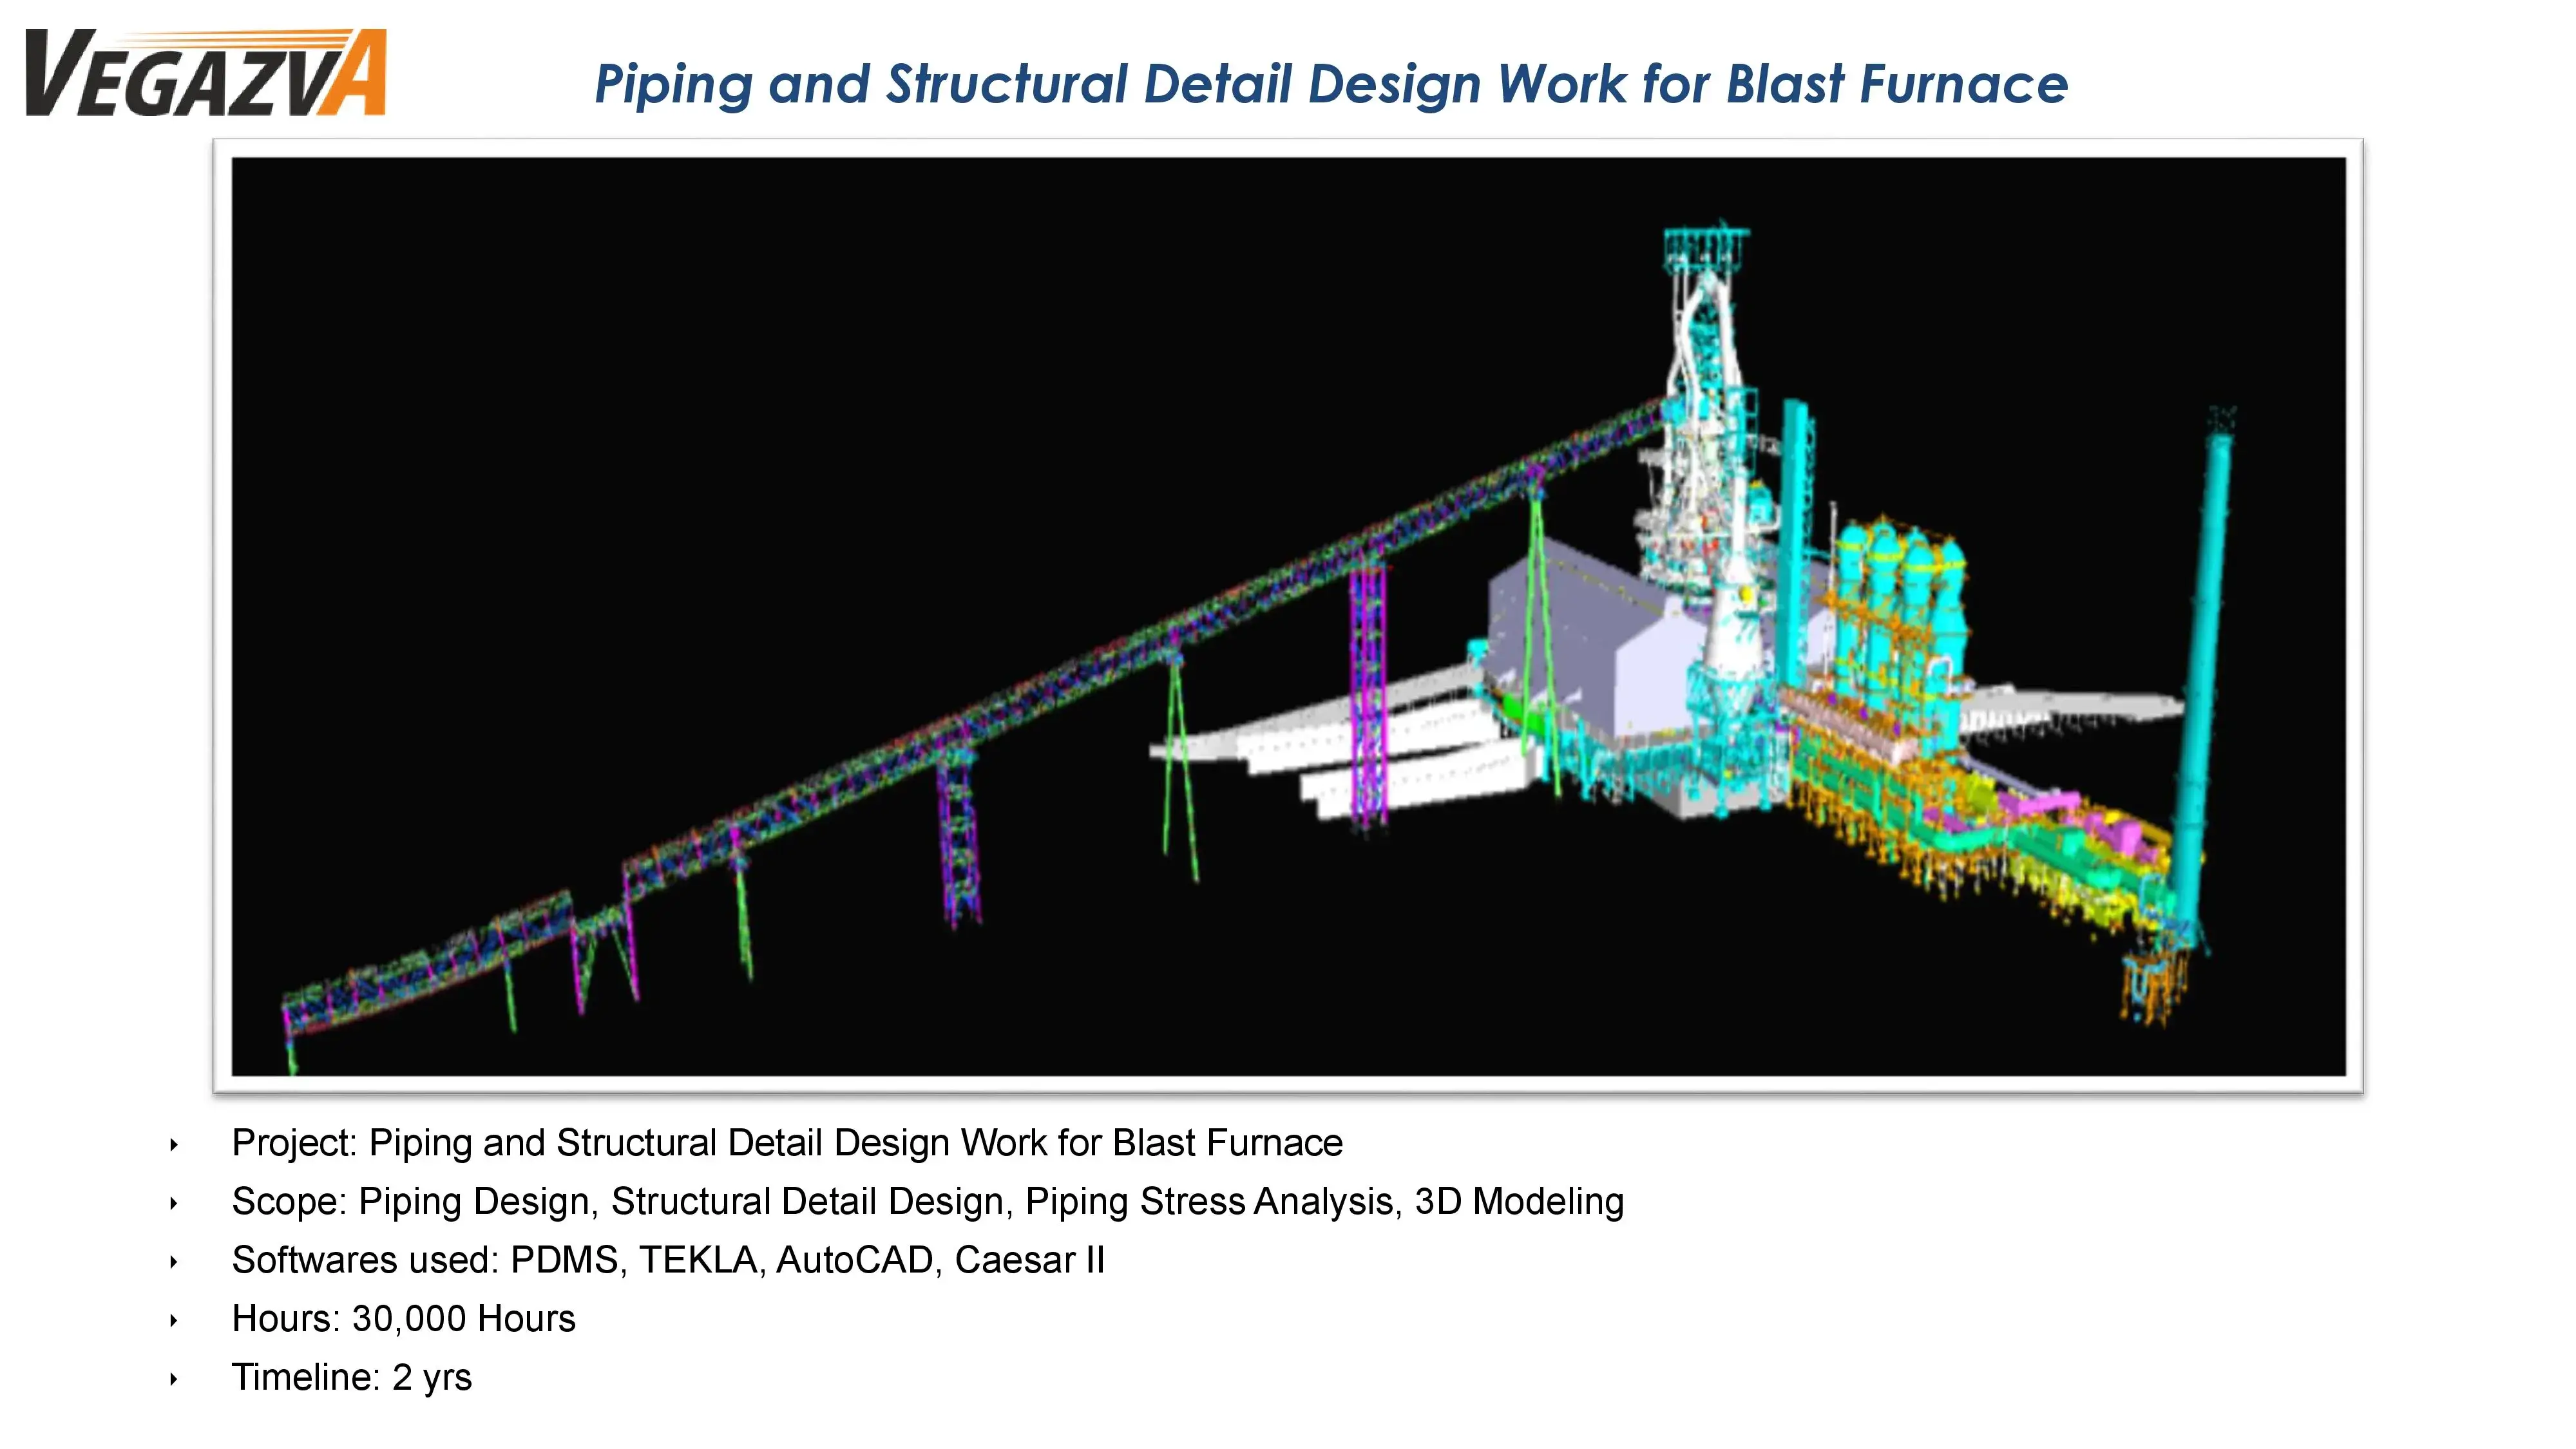 Signature Project - Piping and Structural Detail Design Work for Blast Furnace